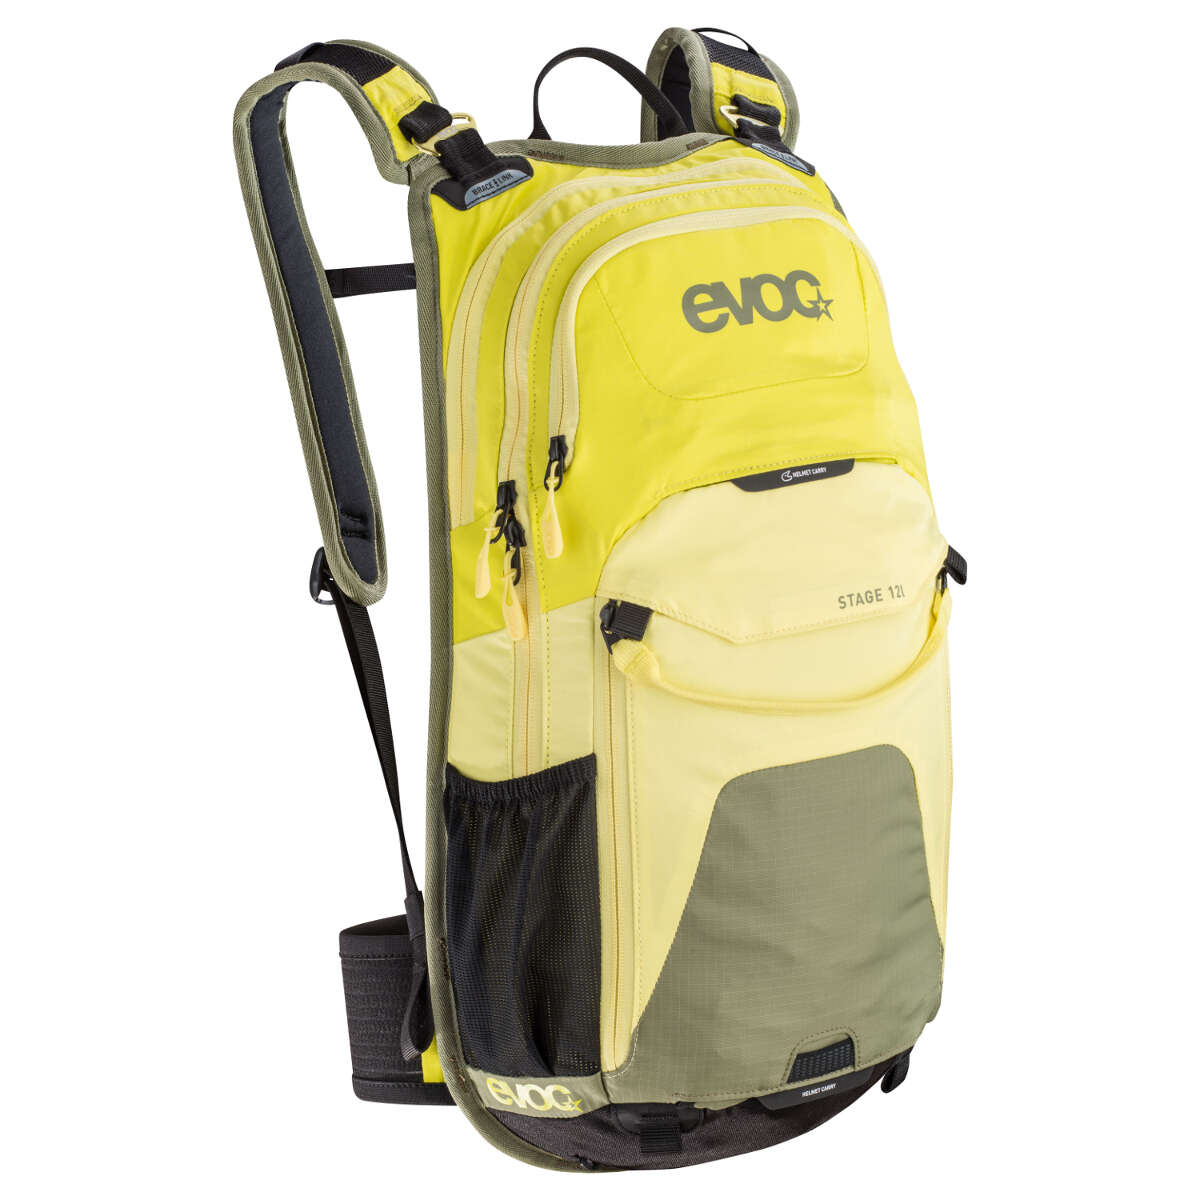 Evoc Backpack with Hydration System Compartment Stage Sulphur-Yellow-Olive, 12 Liter